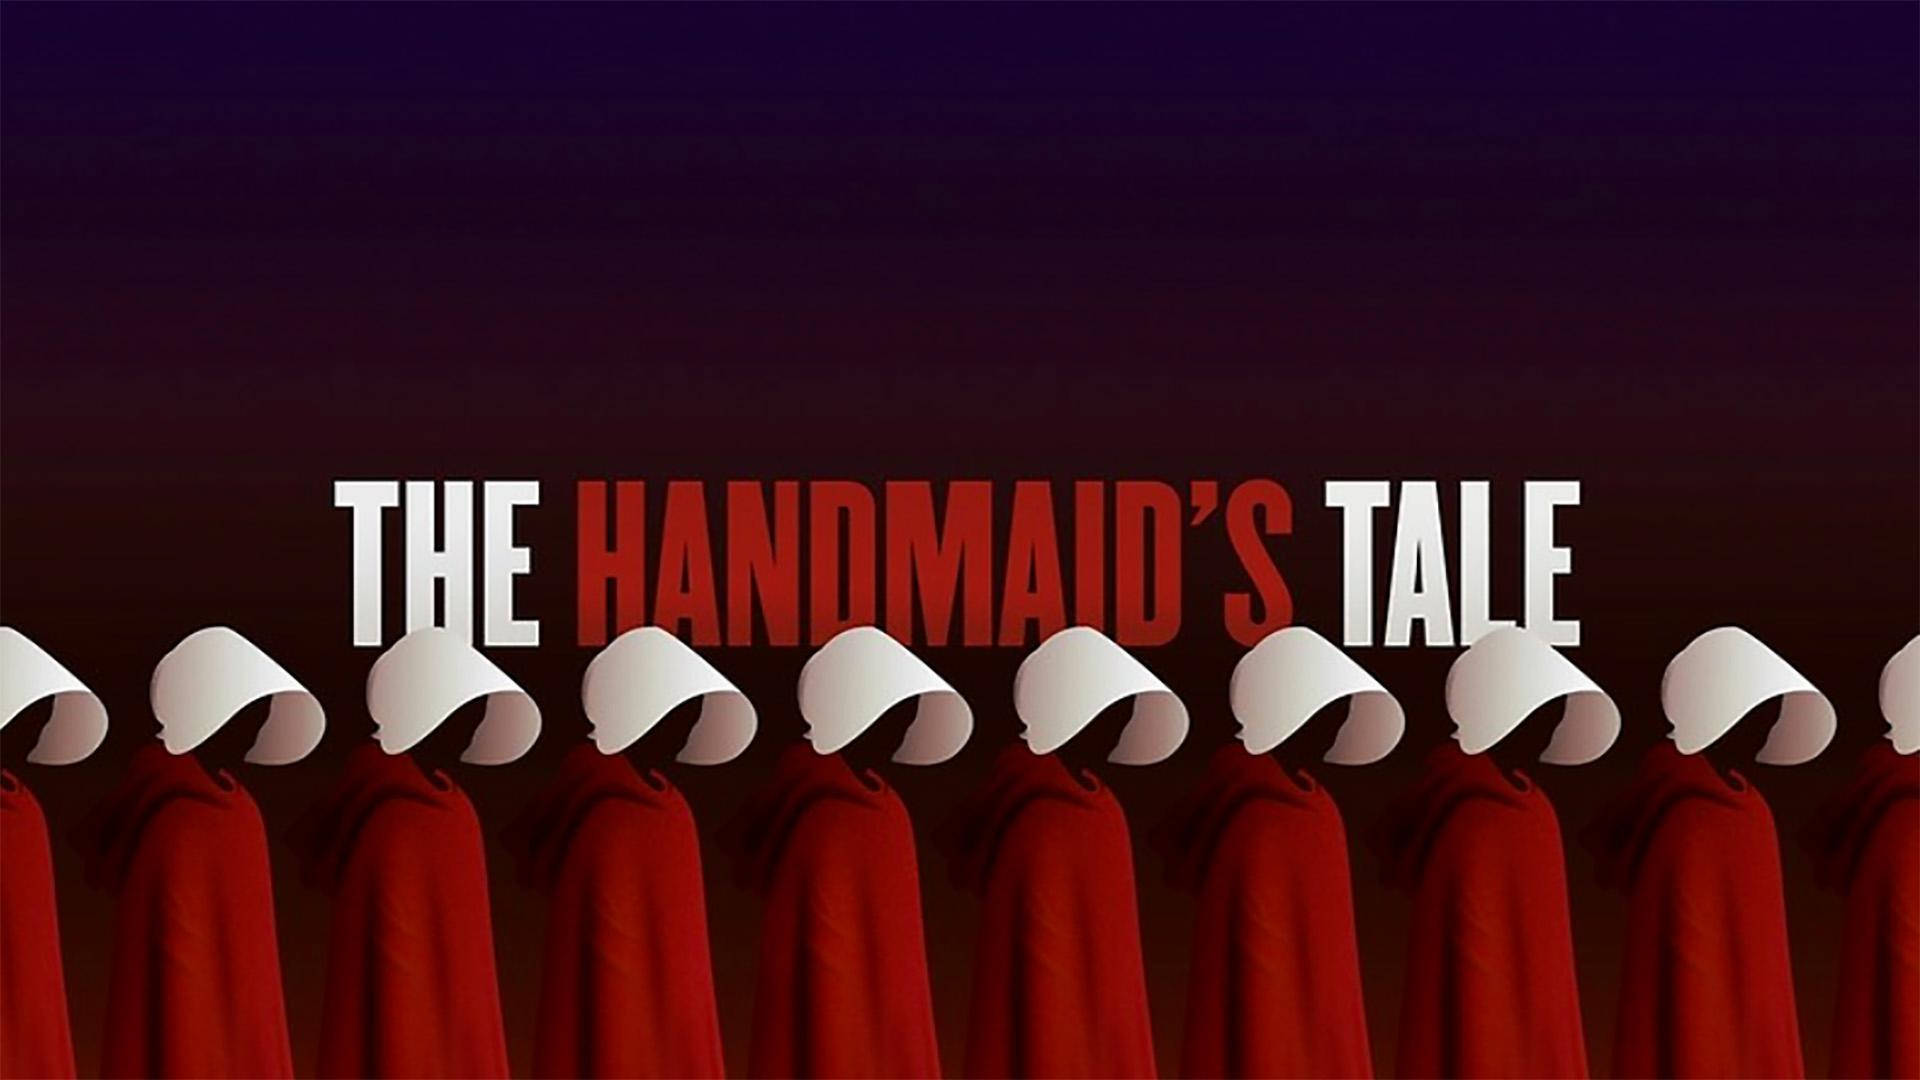 The Handmaid's Tale American Tv Dystopian Series Background